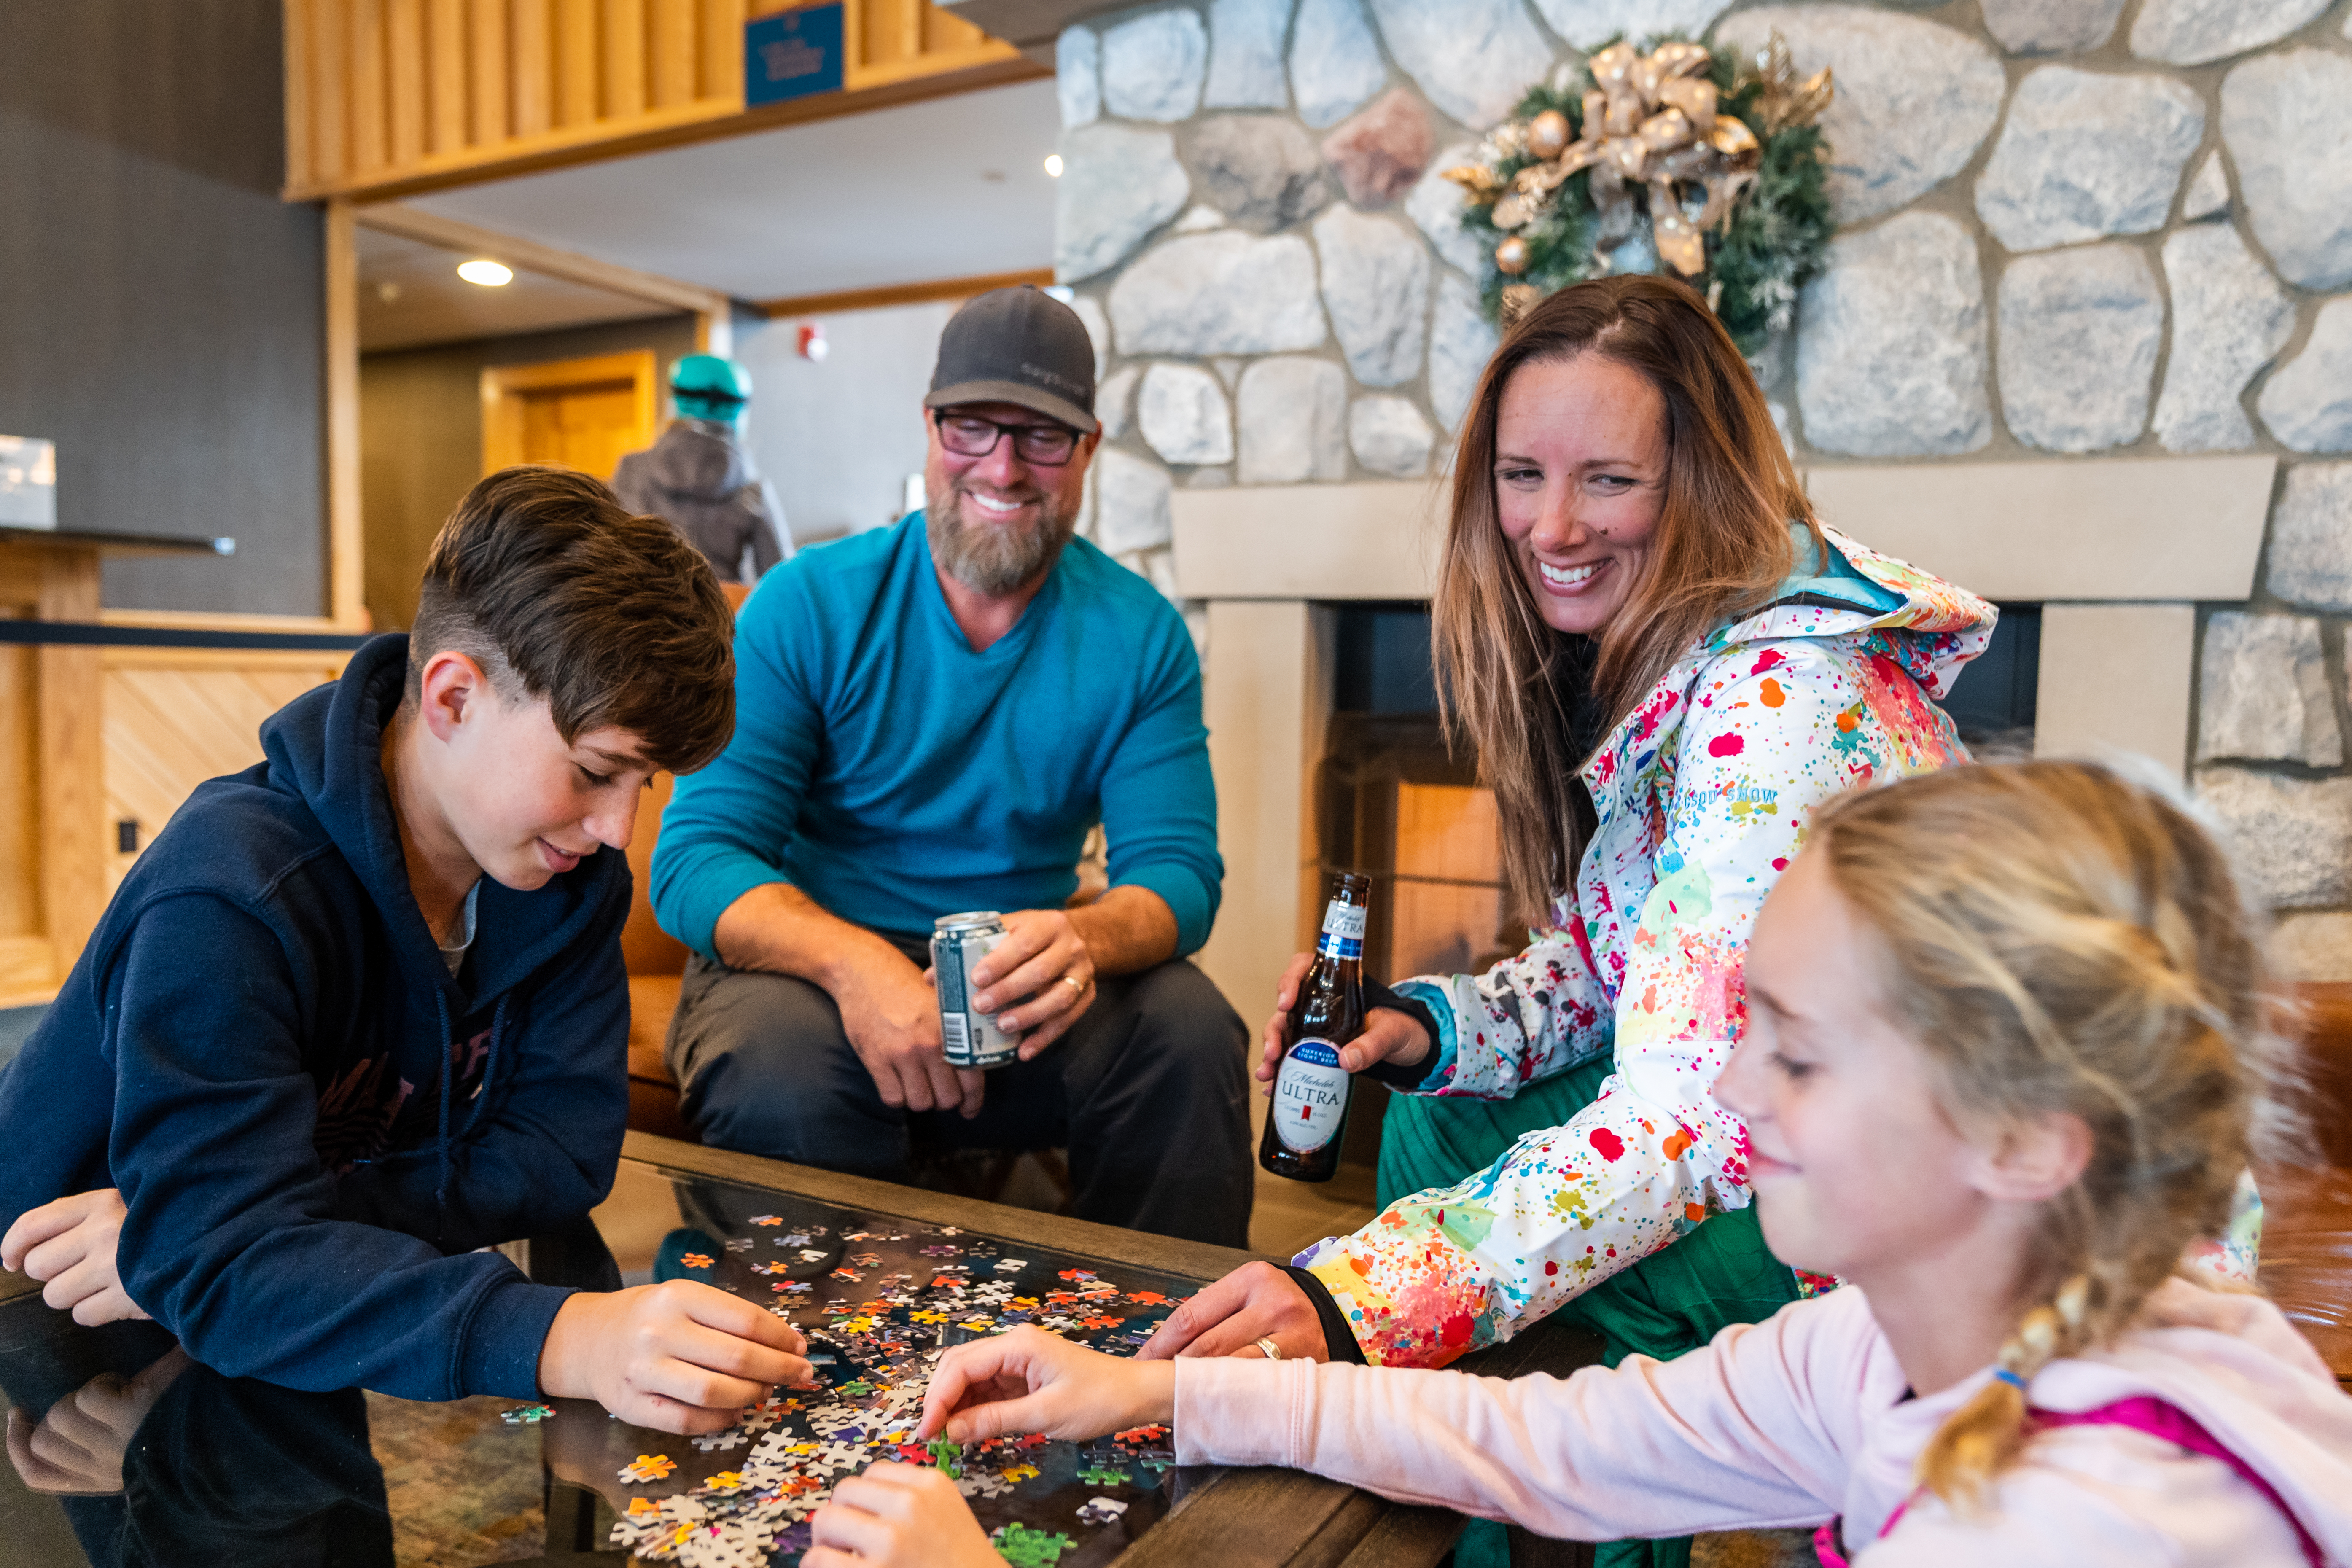 a family plays a game in a holiday setting